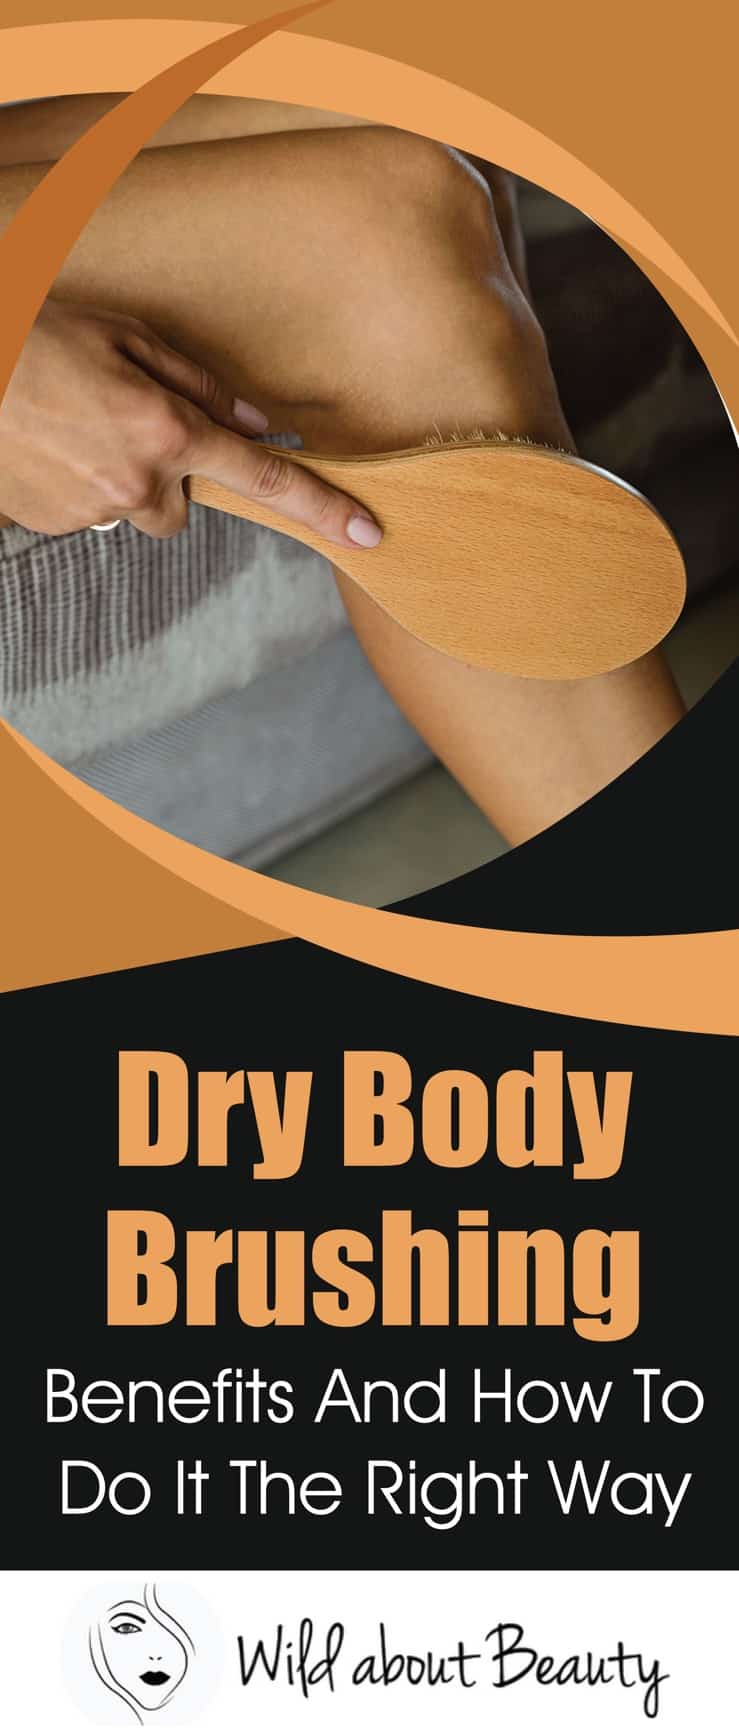 Dry Body Brushing - Benefits and How to do it the Right Way